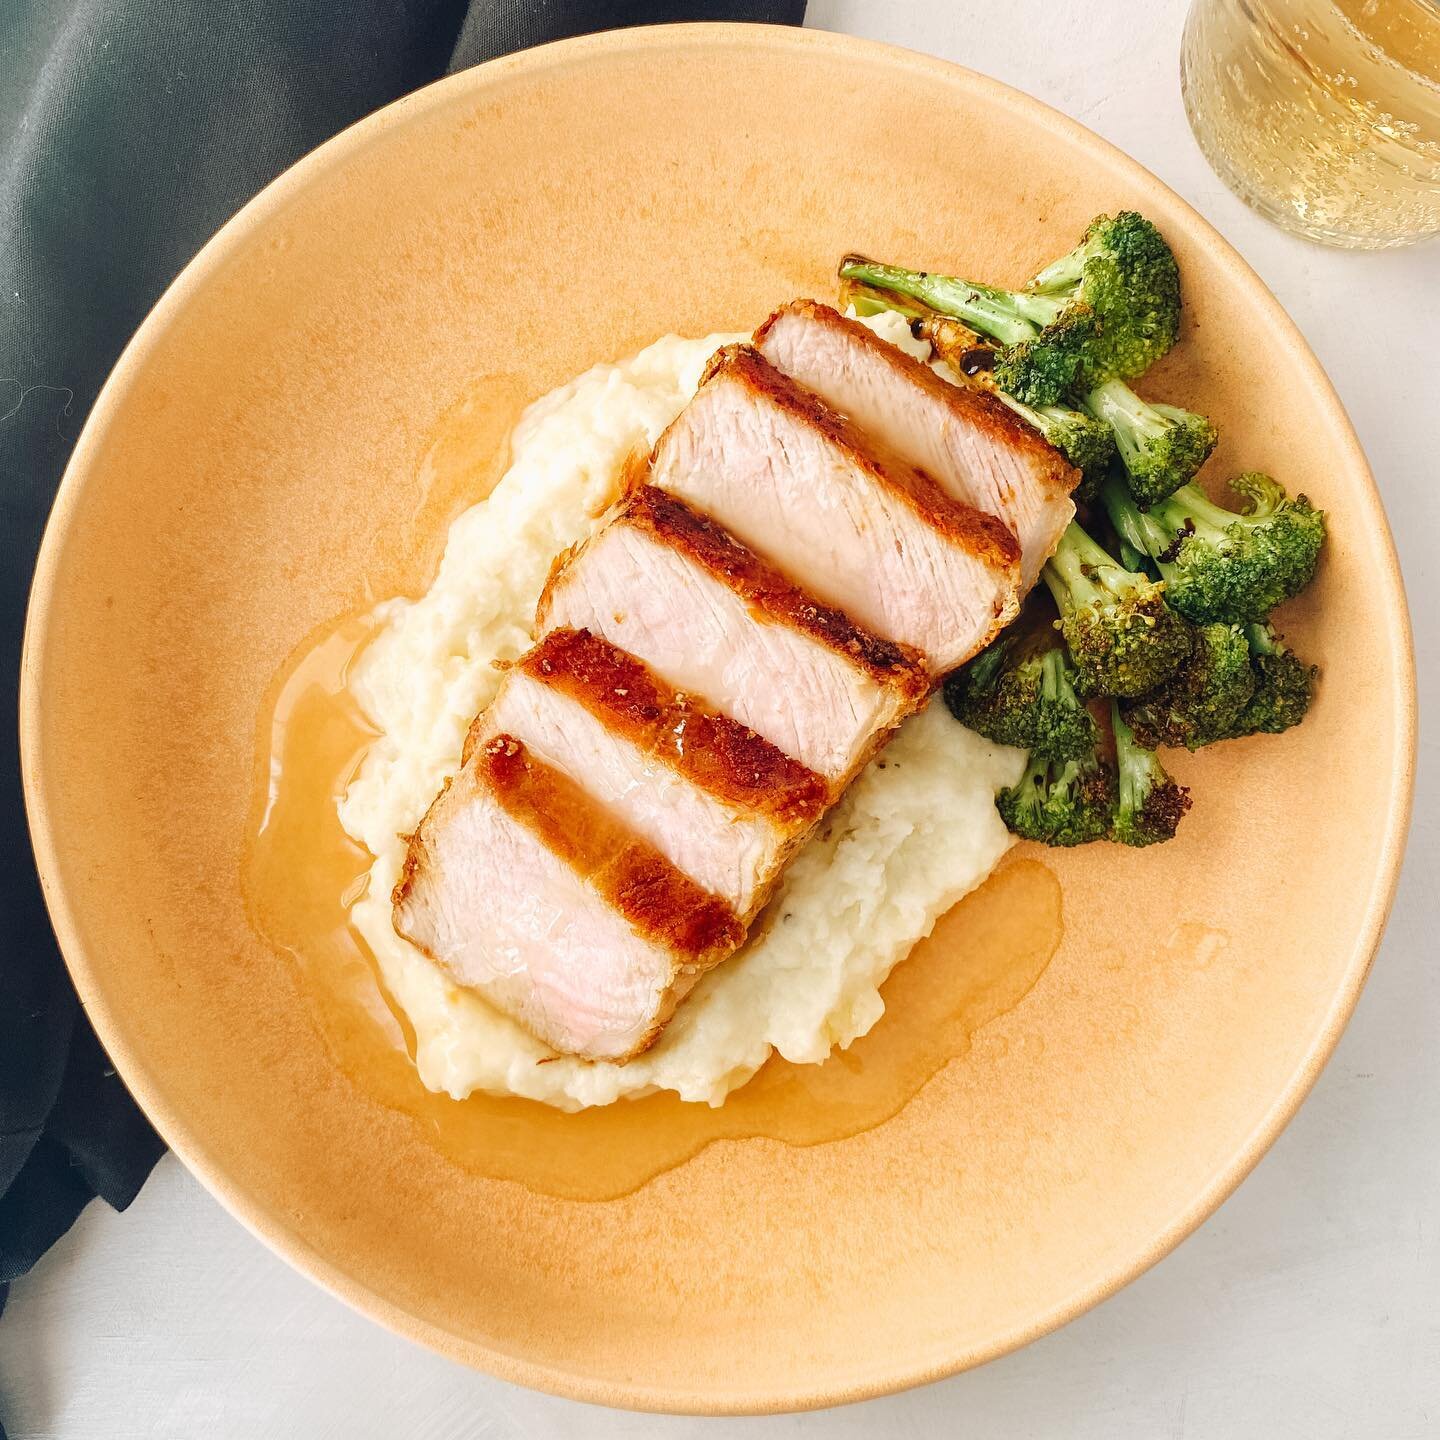 Pork Chops | Mashed Potatoes | Pan-Seared Broccoli 

Made in our virtual kids cooking classes. Your kids can make this too 👩&zwj;🍳 
.
.
.
.
.
.
.
.
.
.

#stamfordmoms #greenwichmoms #darienmoms #ryemoms #ryebrookmoms #scarsdalemoms #nyckids #fairfi